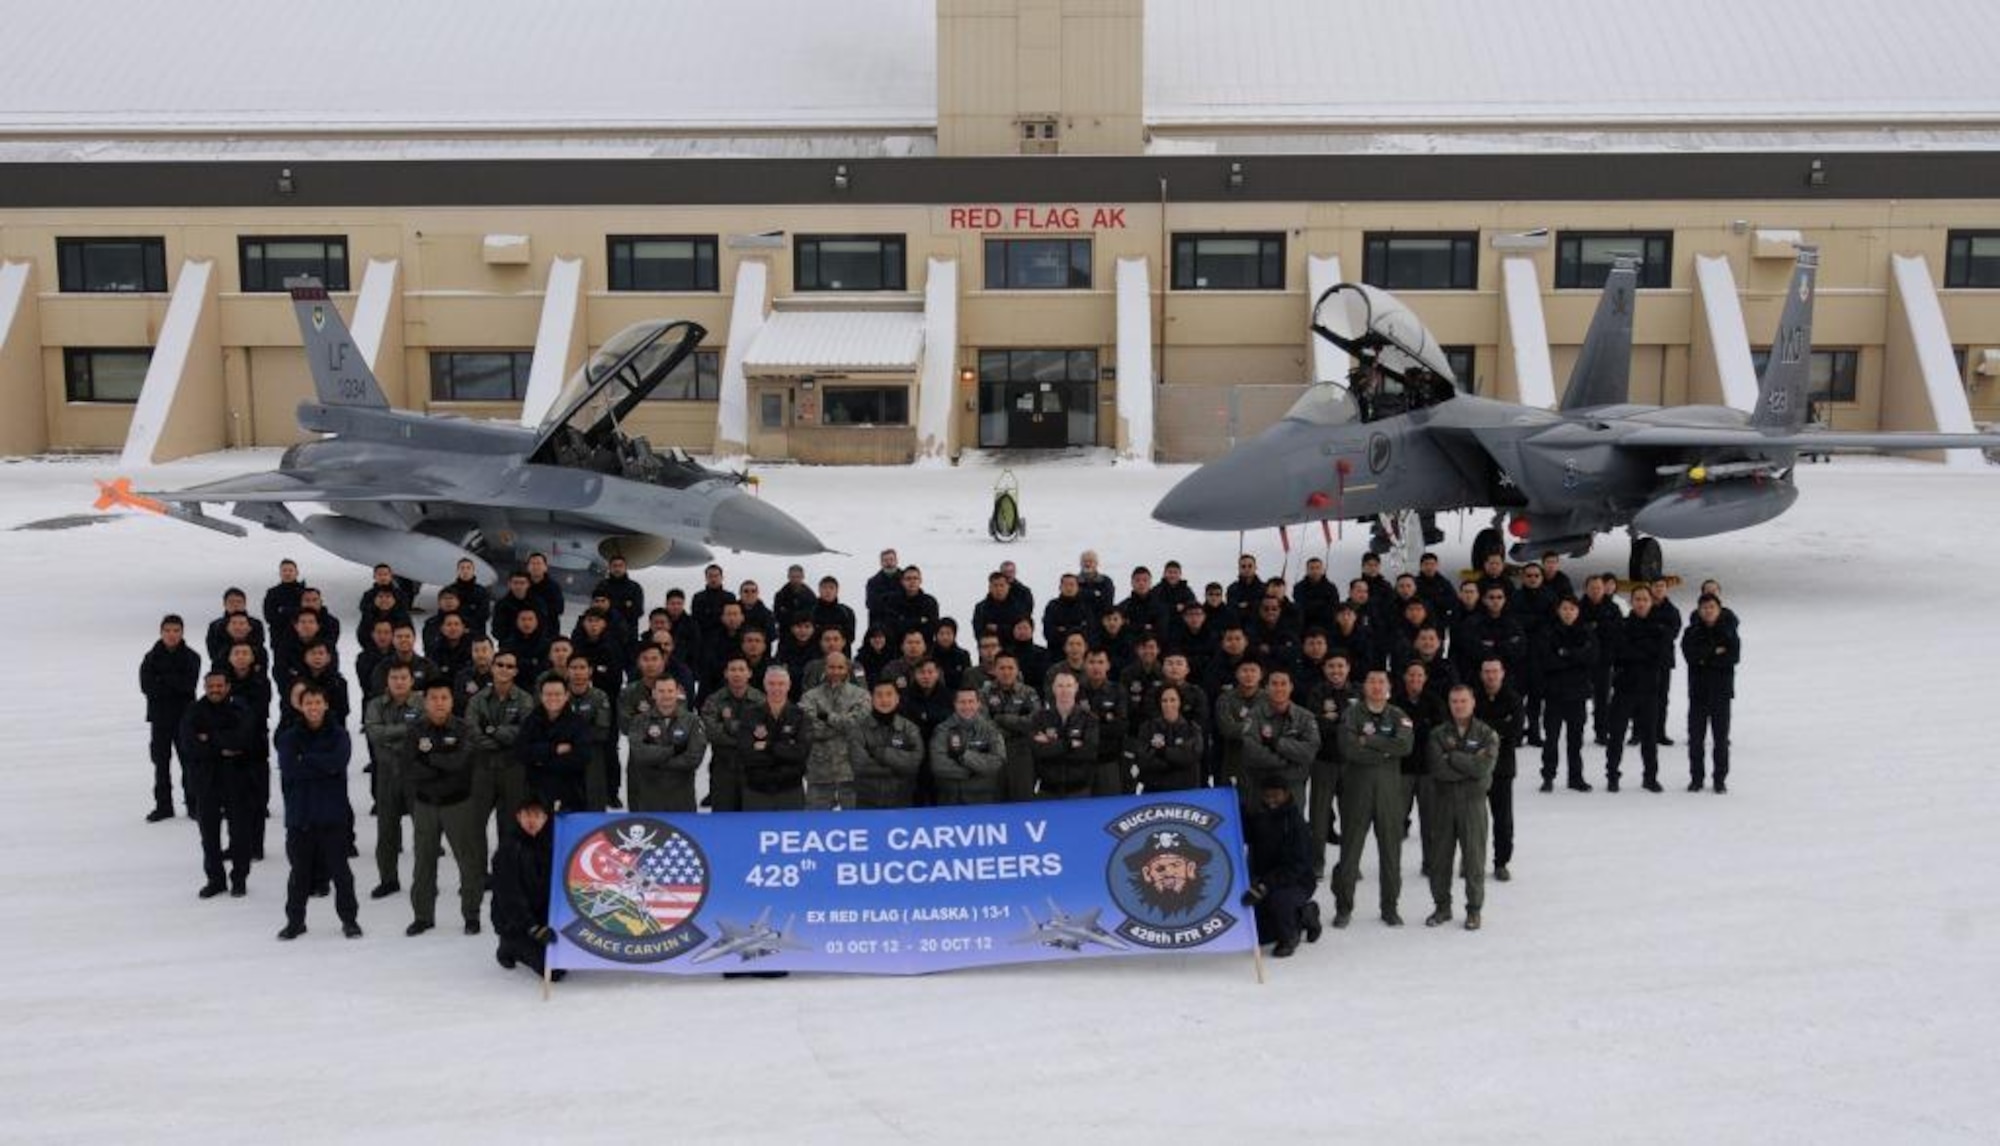 Personnel from the 428th Fighter Squadron pose for a group photo on the final day of the Red Flag-Alaska 13-1 exercise Oct. 19, 2012 at Eielson Air Force Base, Alaska. The 428th FS "Buccaneers" are stationed at Mountain Home Air Force Base, Idaho, as part of a unique, long-term partnership, called Peace Carvin V, with the Republic of Singapore Air Force and have spent the past two weeks training in a simulated combat environment. Peace Carvin V celebrated its 5th anniversary at Mountain Home May 16, 2014. (U.S. Air Force photo/Senior Airman Benjamin Sutton/RELEASED)